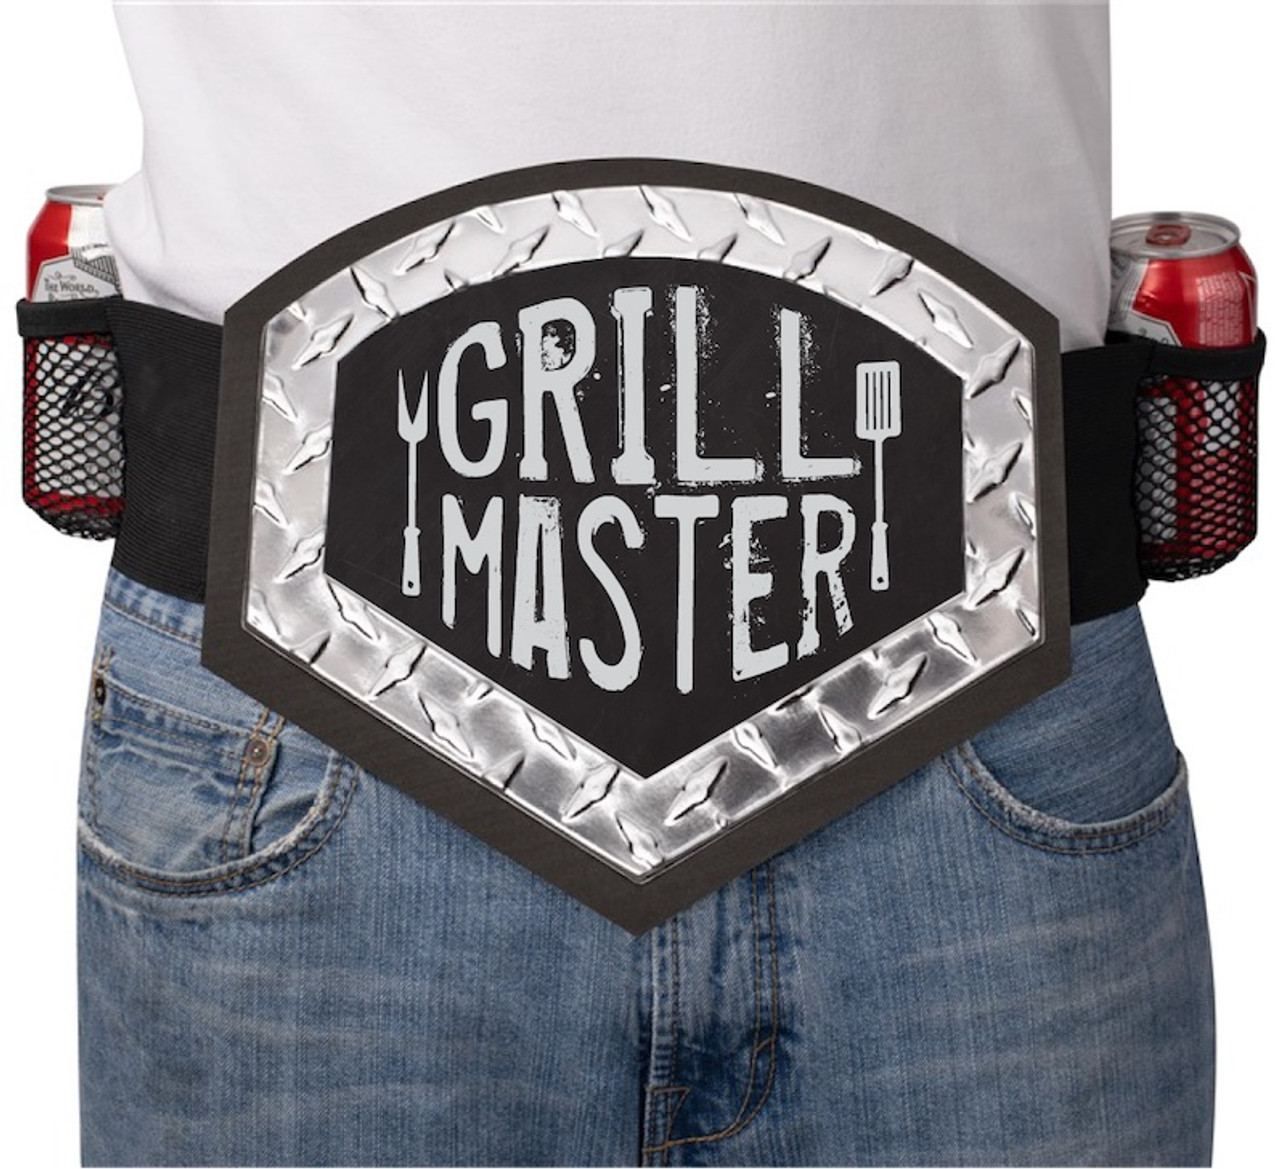 This Guy Is A Grill Master BBQ Dad Gift Ideas For' Men's T-Shirt